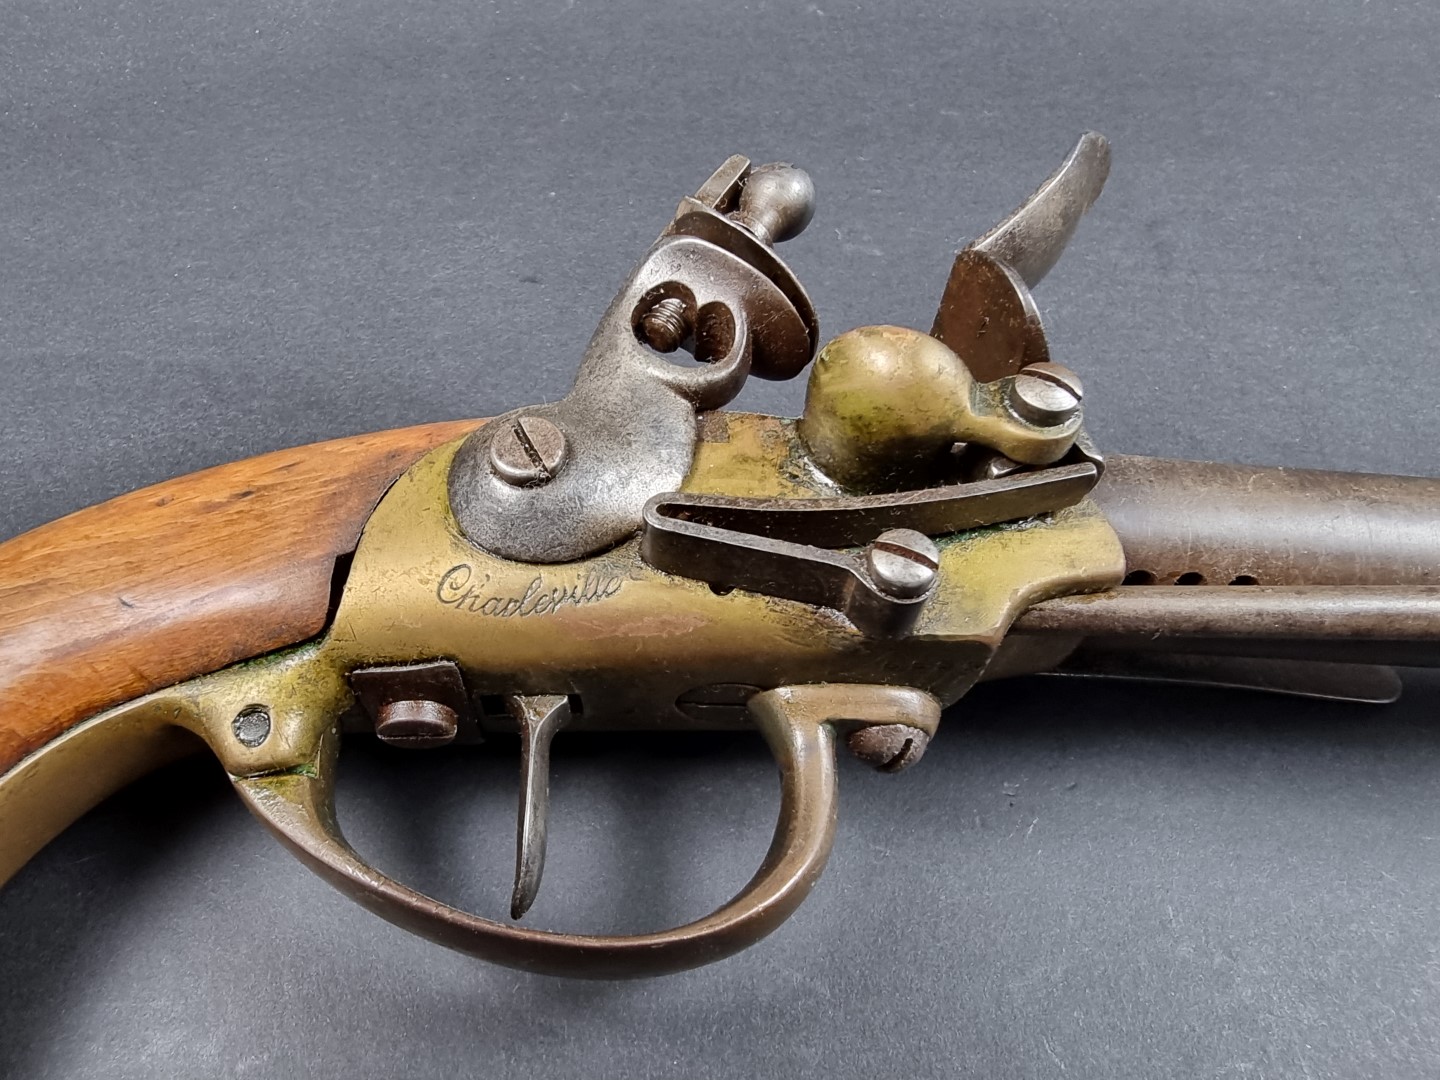 A rare Napoleonic French M-1777 cavalry pistol, with a 7.5in smooth bore barrel and brass action, - Image 2 of 4